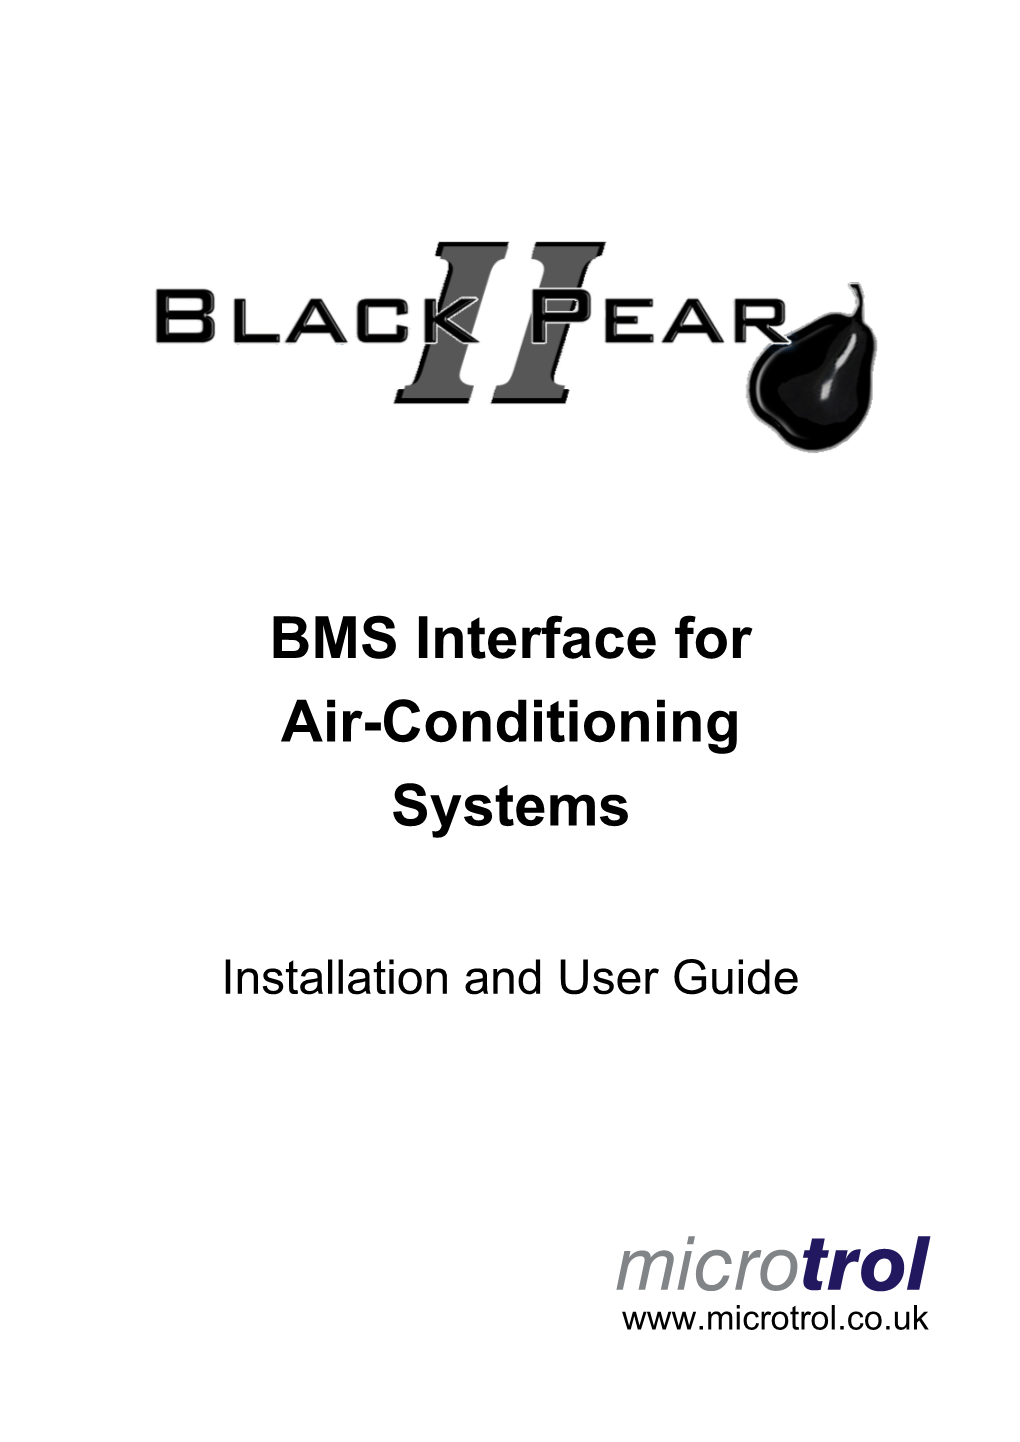 BMS Interface for Air-Conditioning Systems